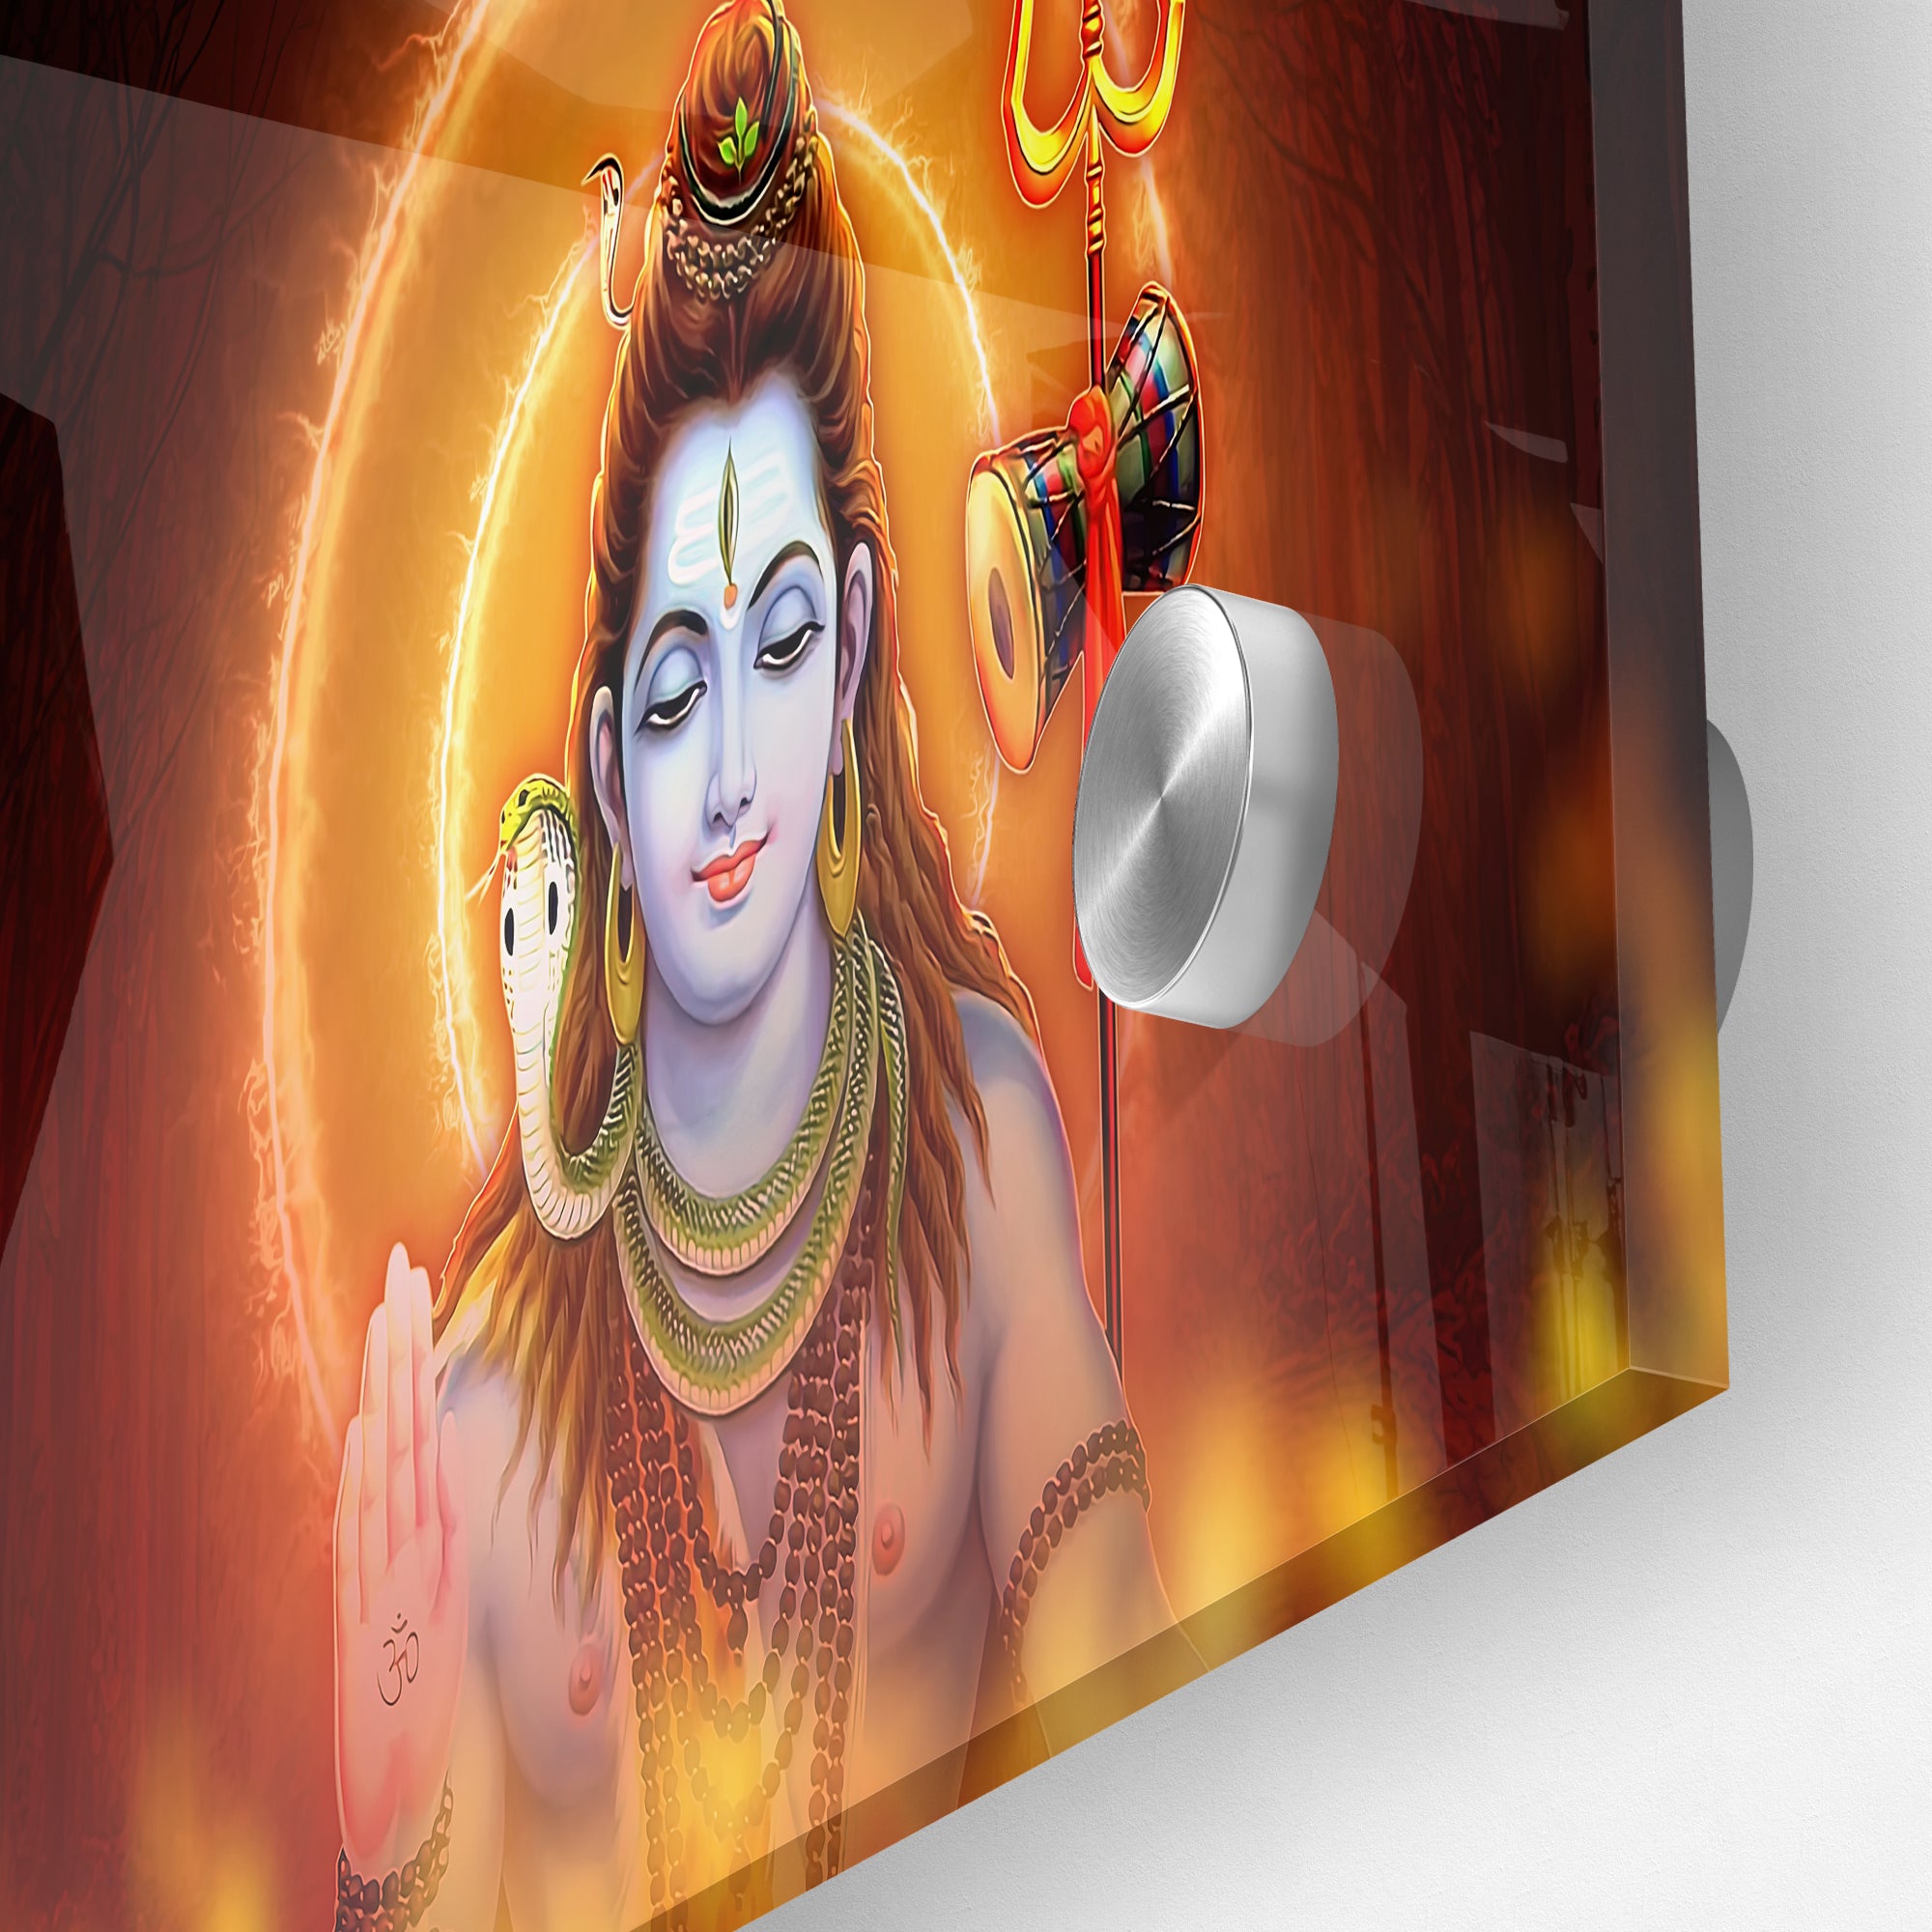 Lord Shiv with Fire and Sun Rays Acrylic Wall Painting